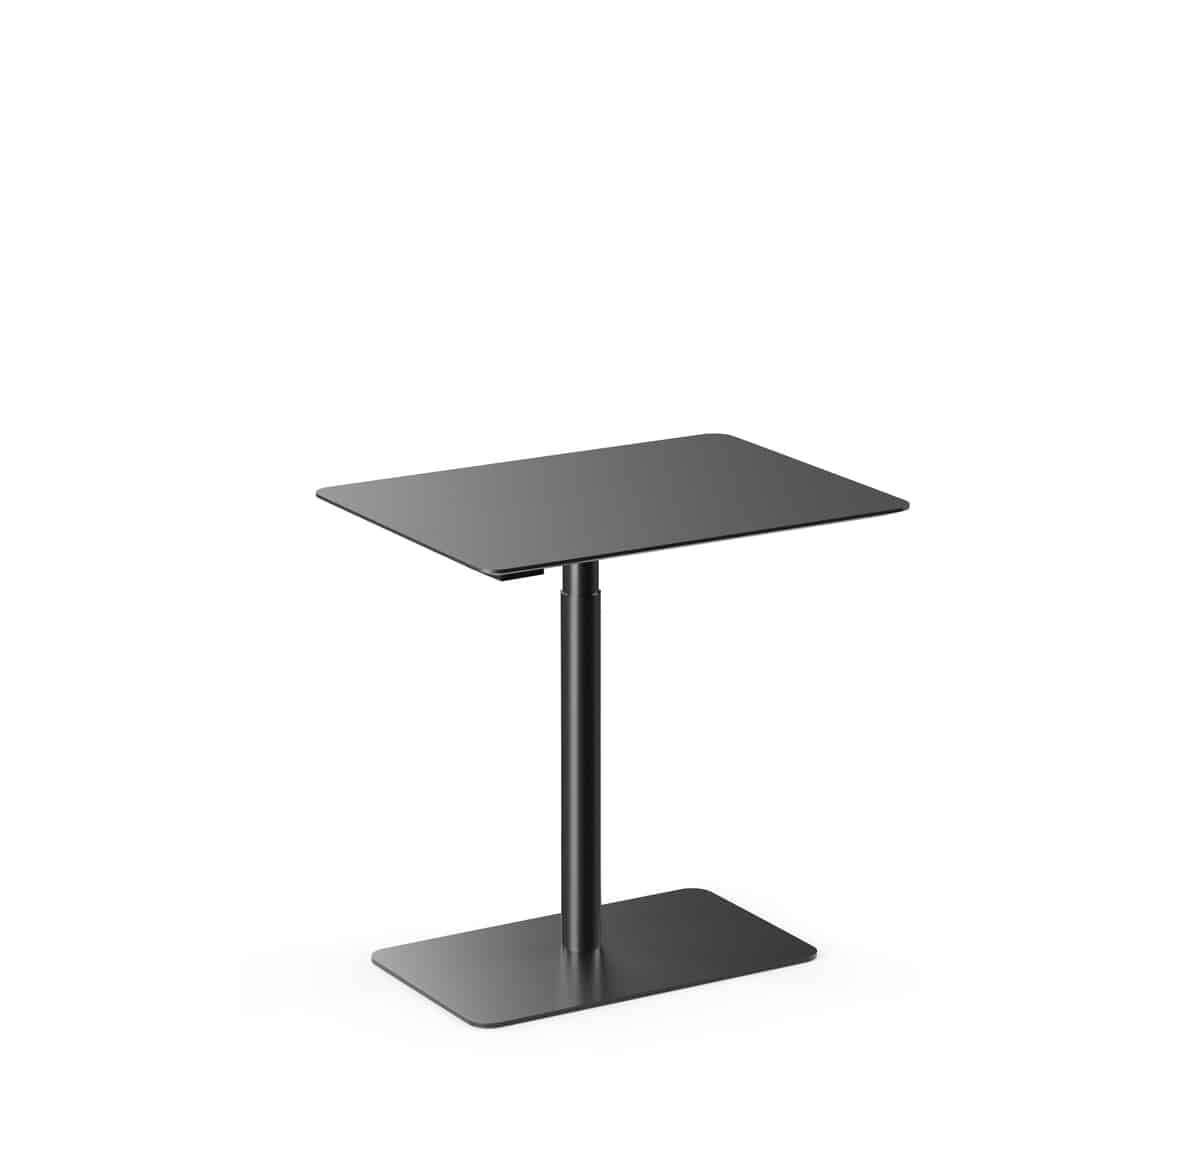 Bobby_sit_and_stand_table_80x60_02_Documents_jpg_1200_px